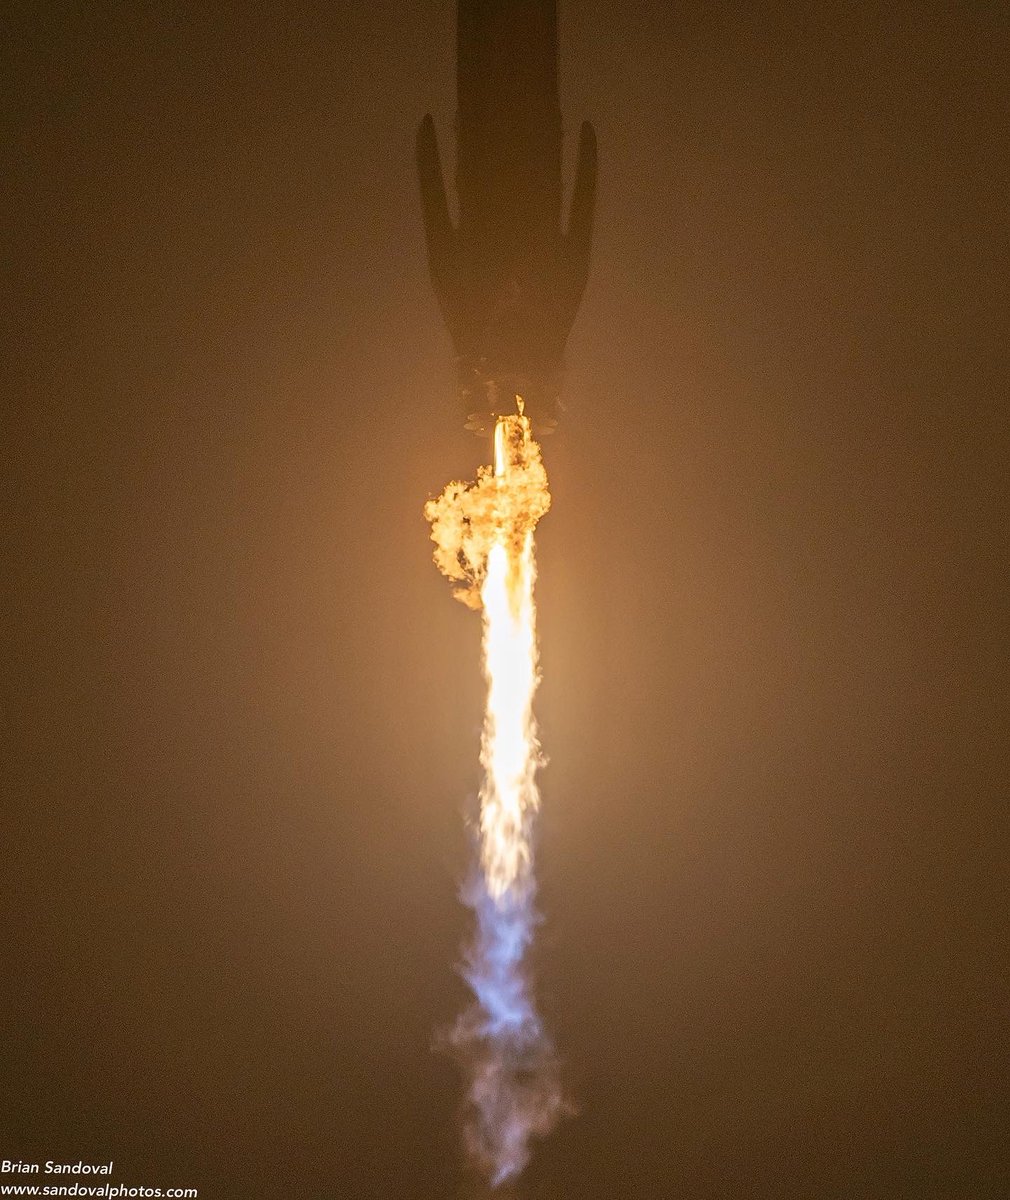 Falcon 9 landing after taking the NROL-85 mission to space. Foggy and dark, a classic Vandenberg launch! #NROL85